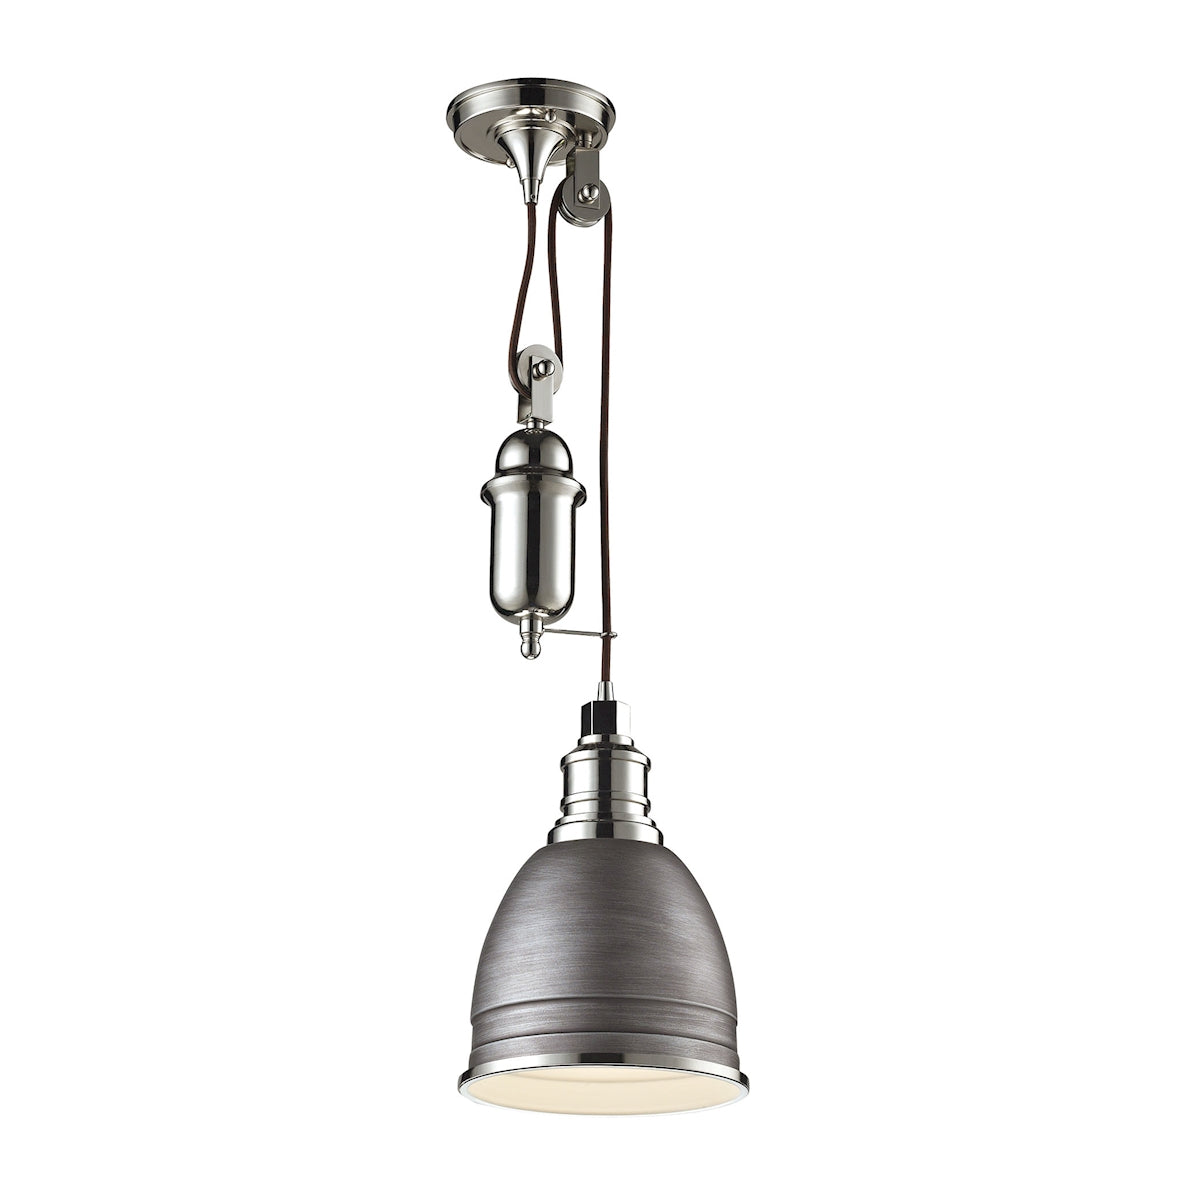 ELK Lighting 66881/1 Carolton 1-Light Adjustable Pendant in Polished Nickel and Weathered Zinc with Grey Shade